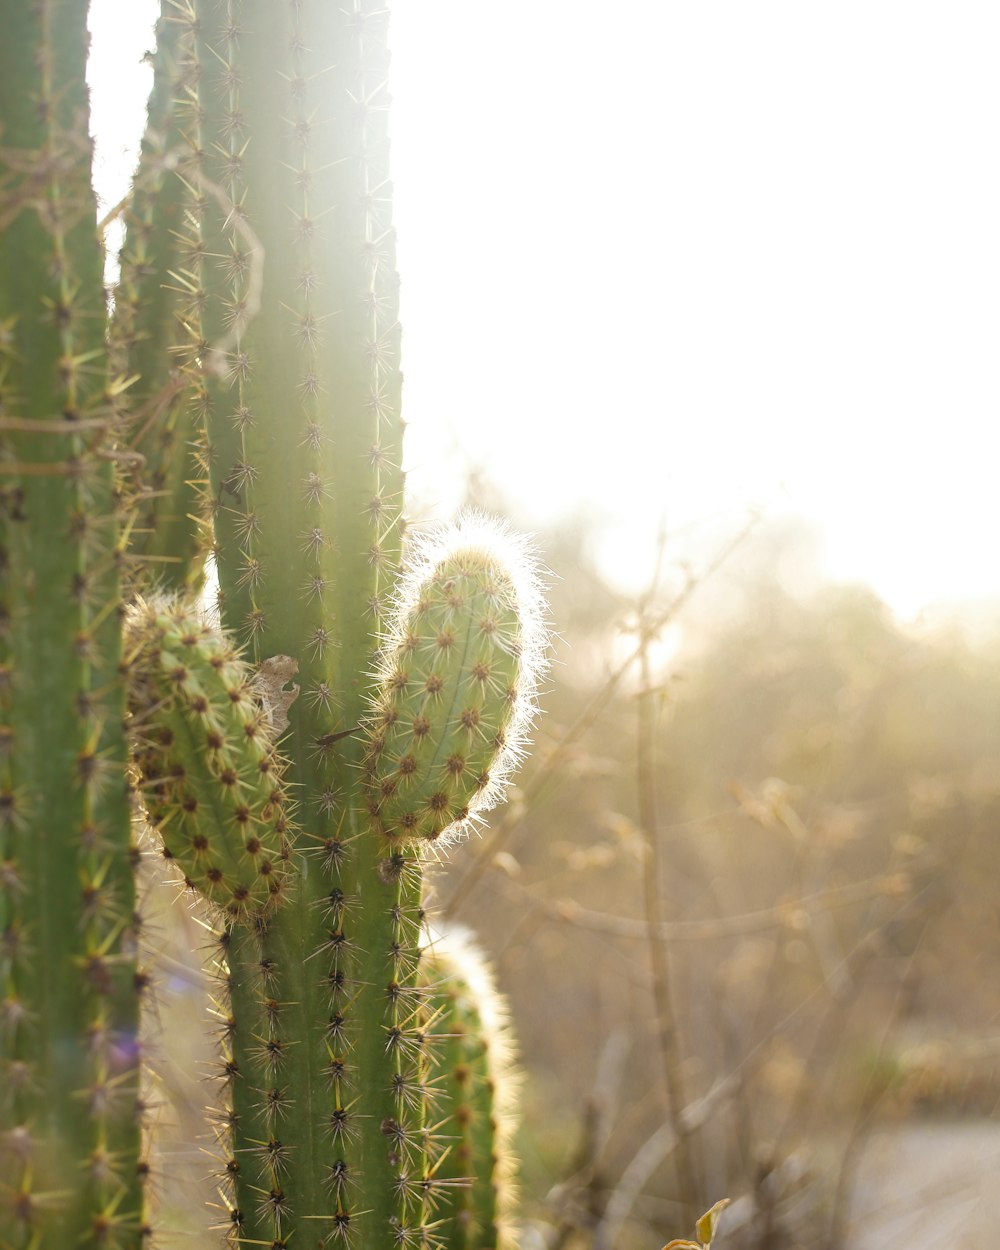 a close up of a cactus with a sky background